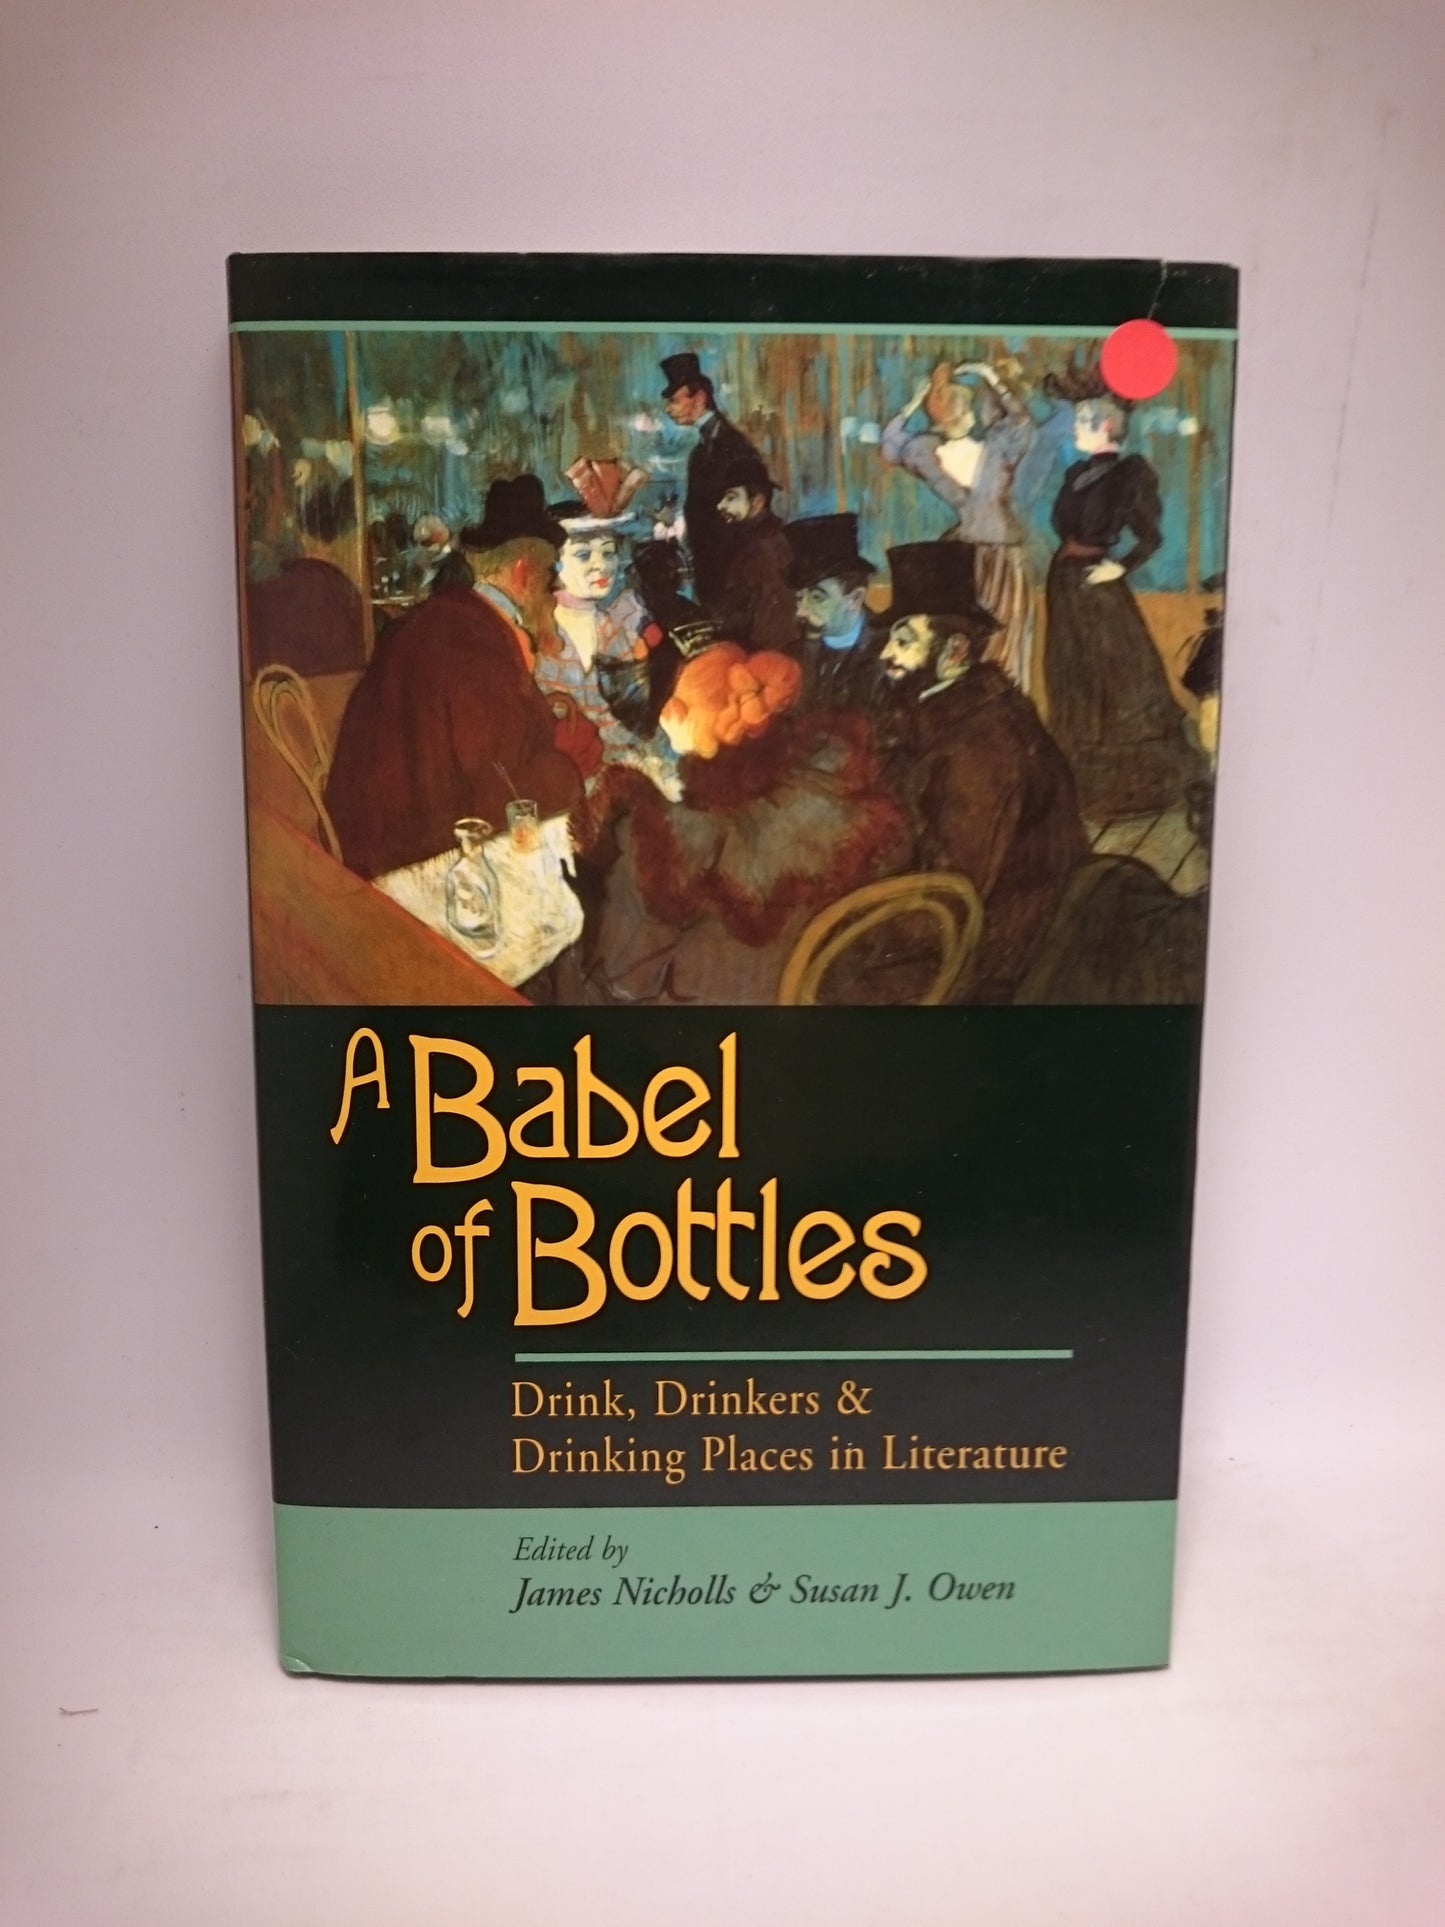 A Babel of Bottles: Drink, Drinkers & Drinking Places in Literature